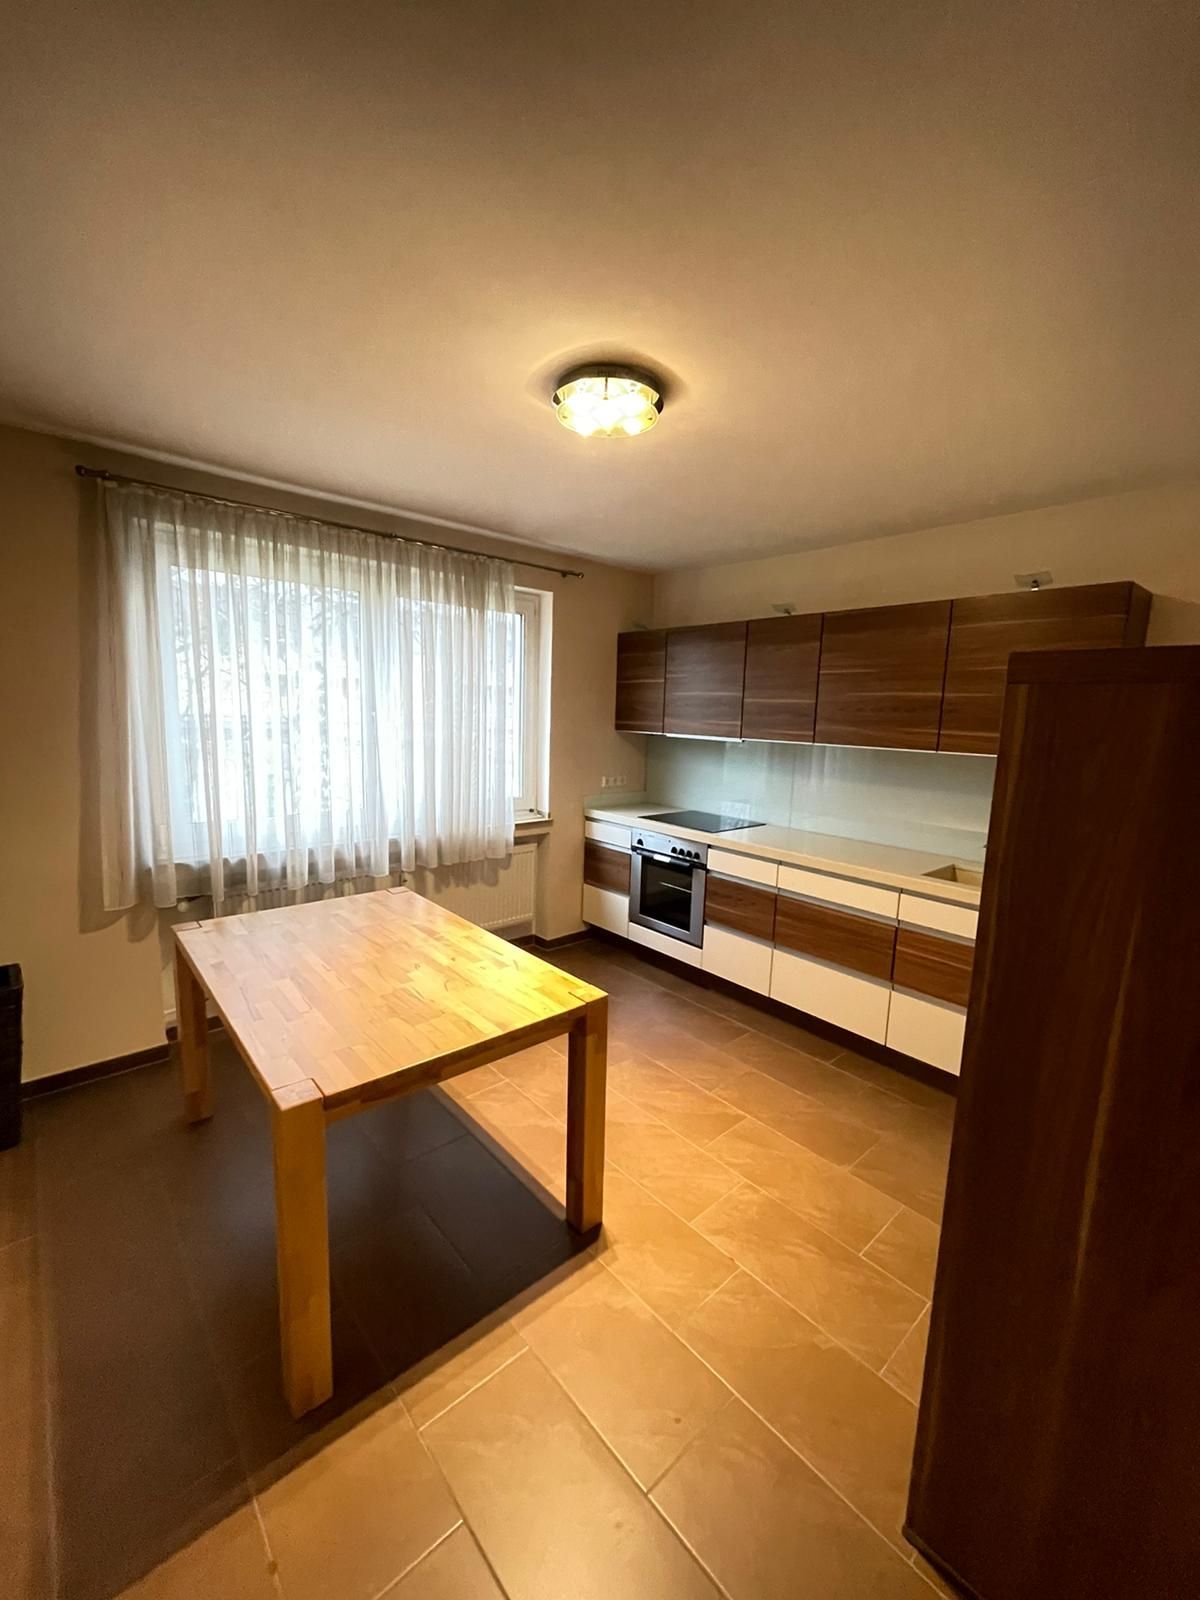 Newly renovated and fully equipped 2-room apartment with balcony and communal garden for rent in a central location